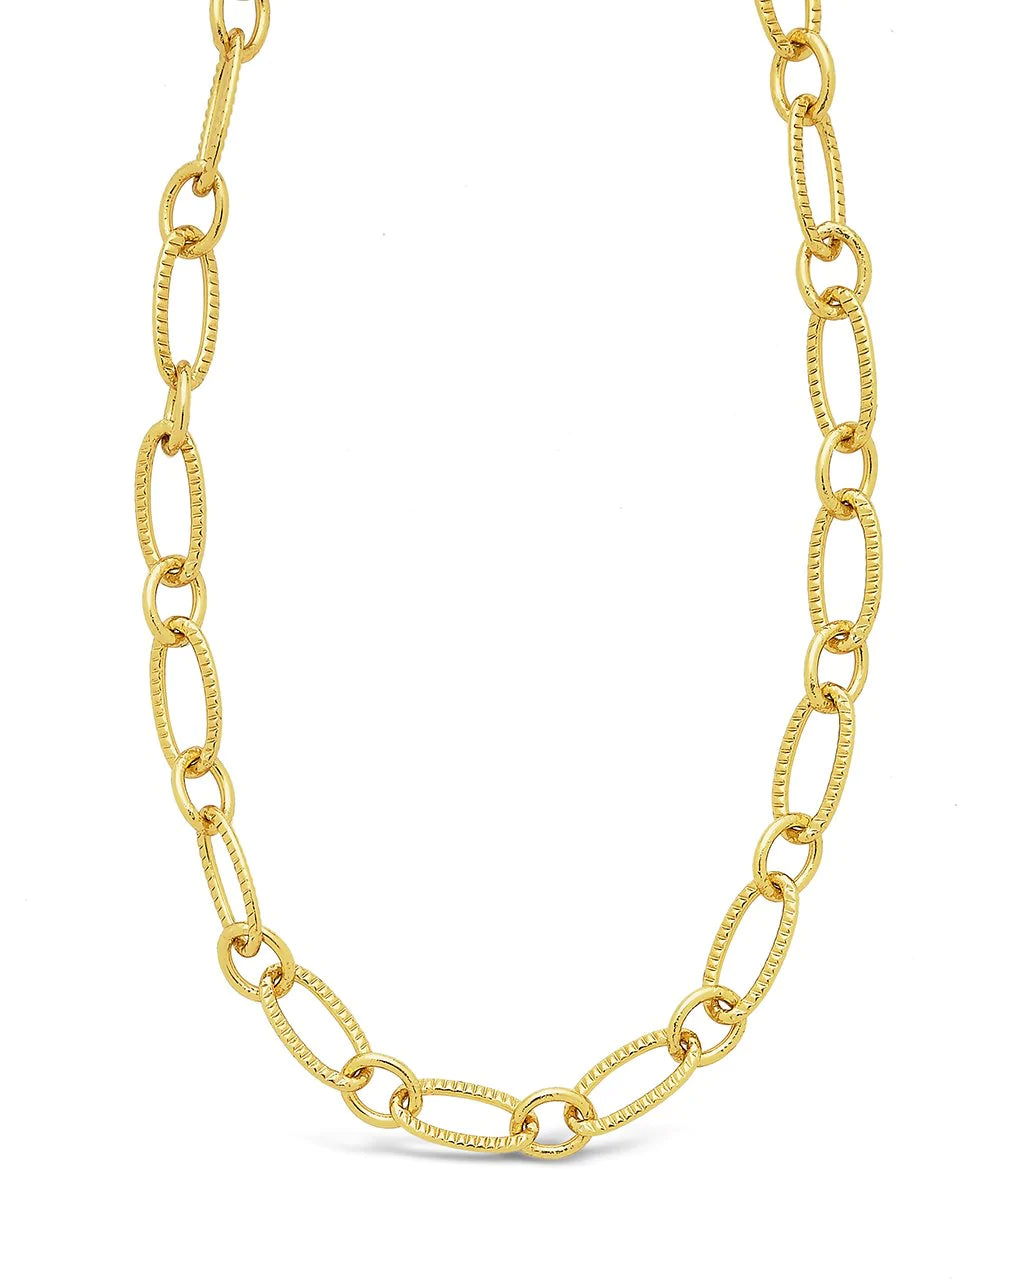 Textured Oval Link Chain Necklace